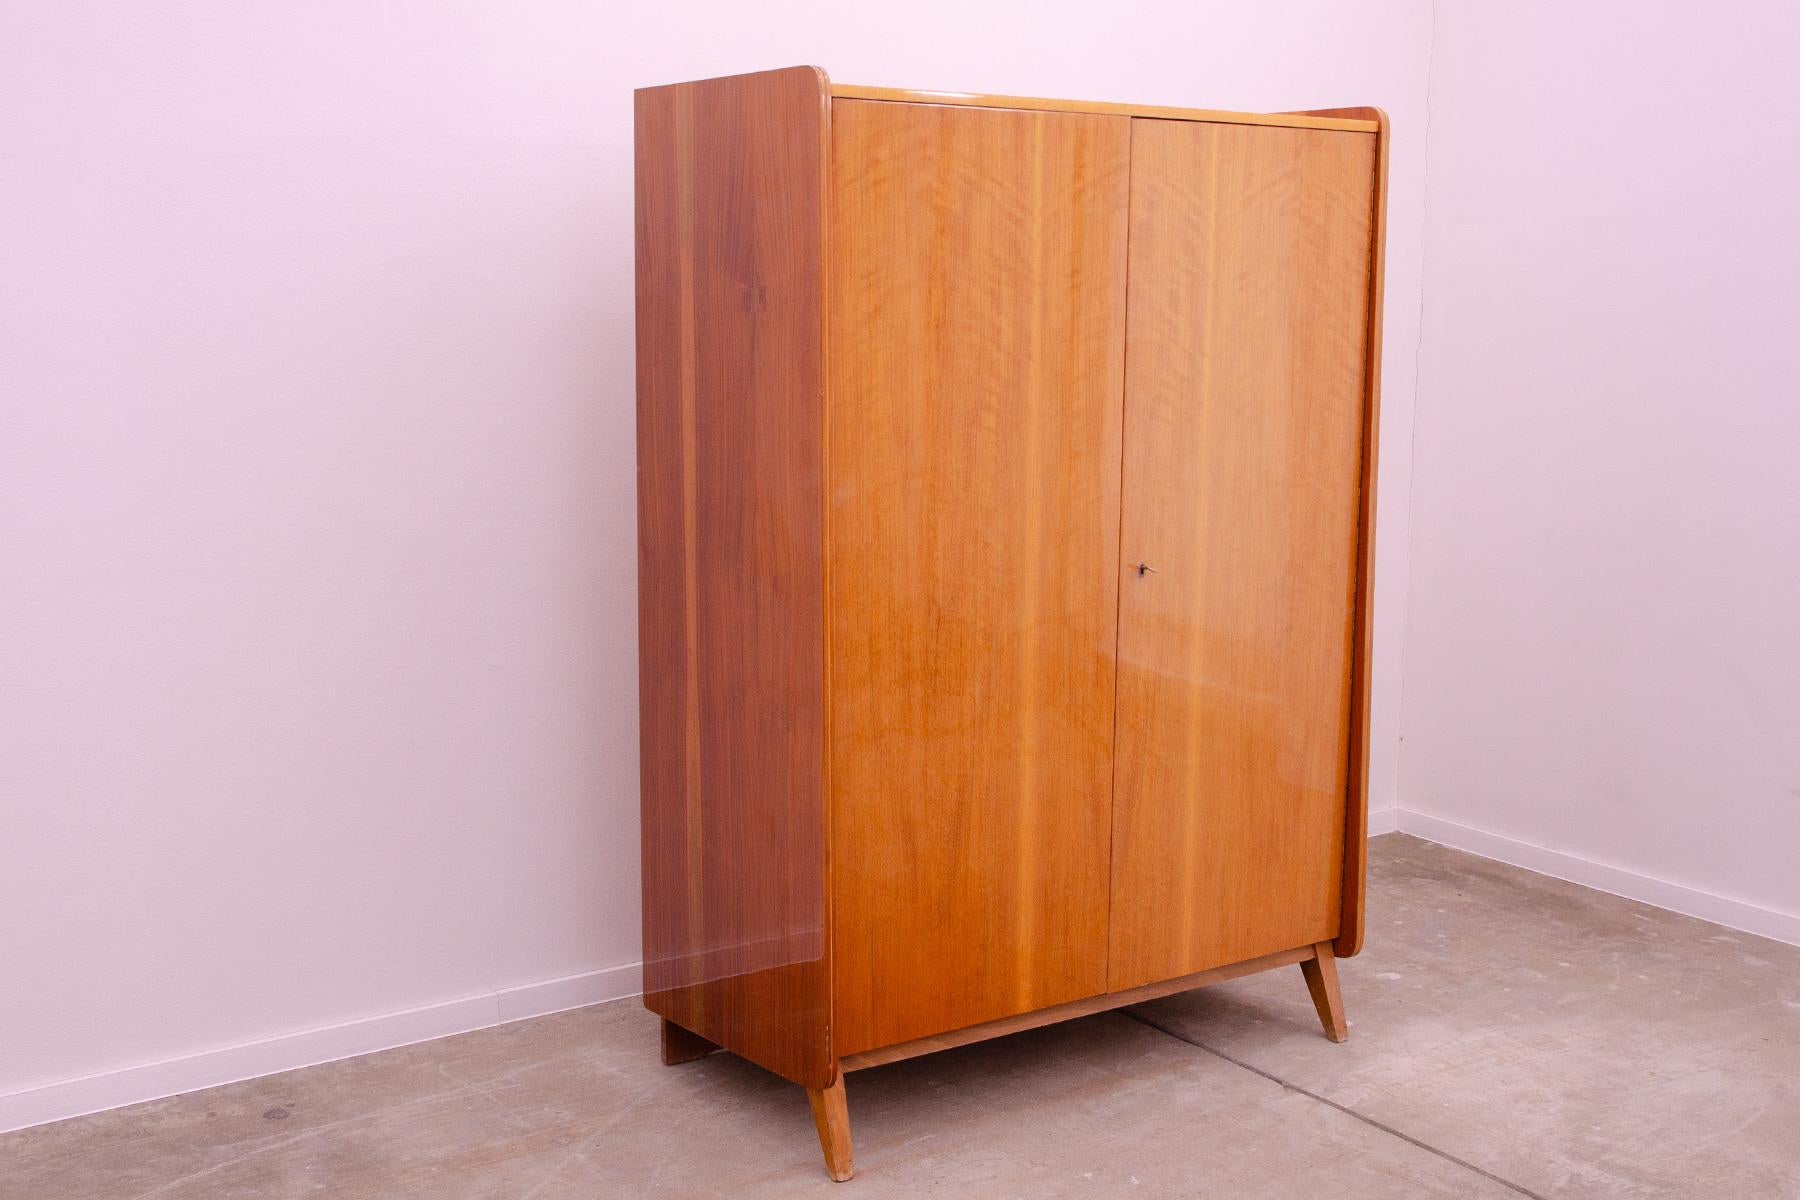 This wardrobe was designed by František Jirák for Tatra nábytok company in the former Czechoslovakia in the 1960´s

It´s made of high gloss polished beechwood and plywood.

You can hang your clothes in it, as well as use a set of drawers to place